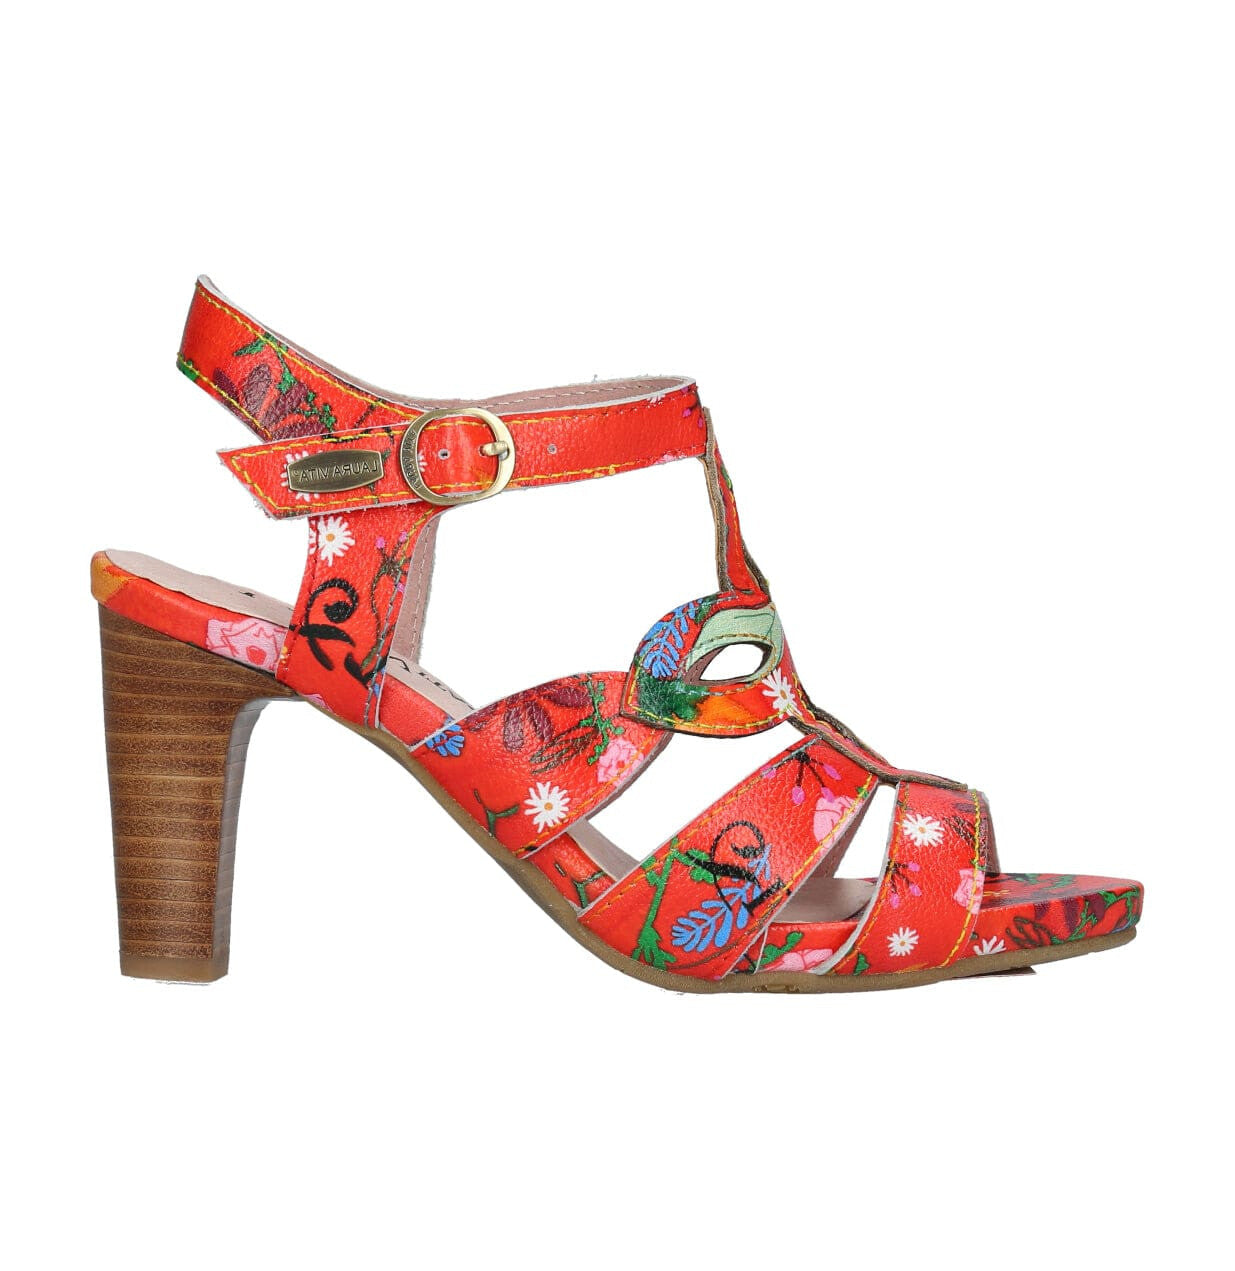 Chaussures ALCBANEO 209 - 35 / Rouge - Sandale